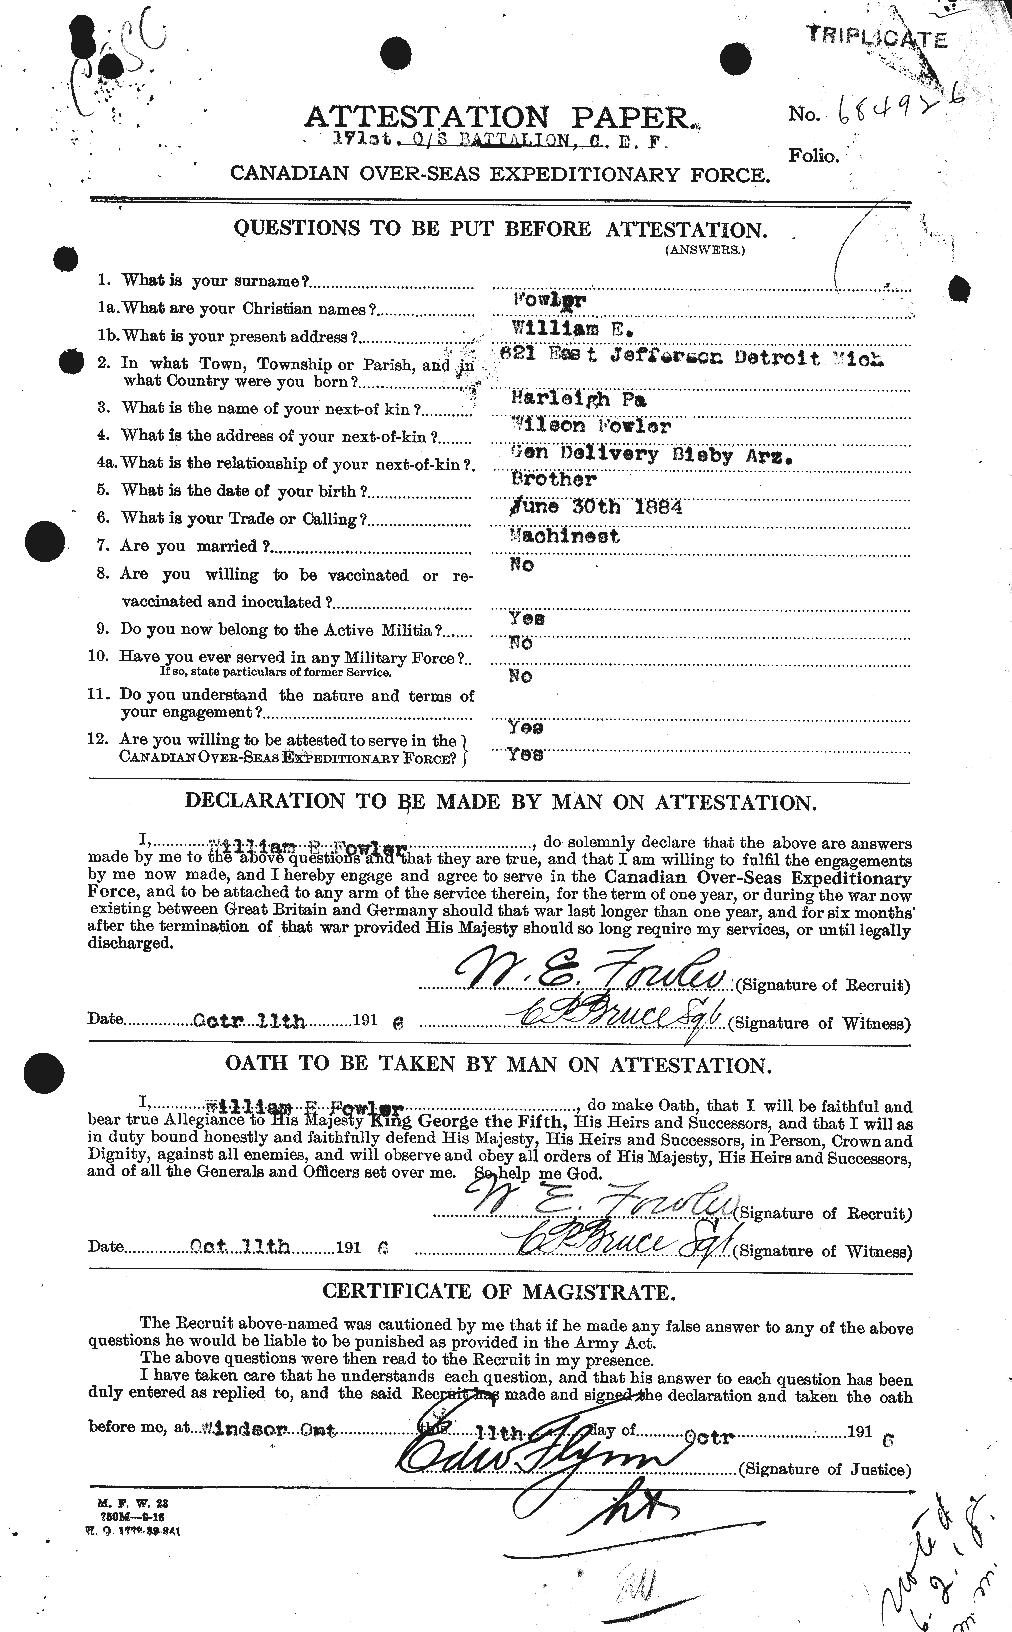 Personnel Records of the First World War - CEF 338619a